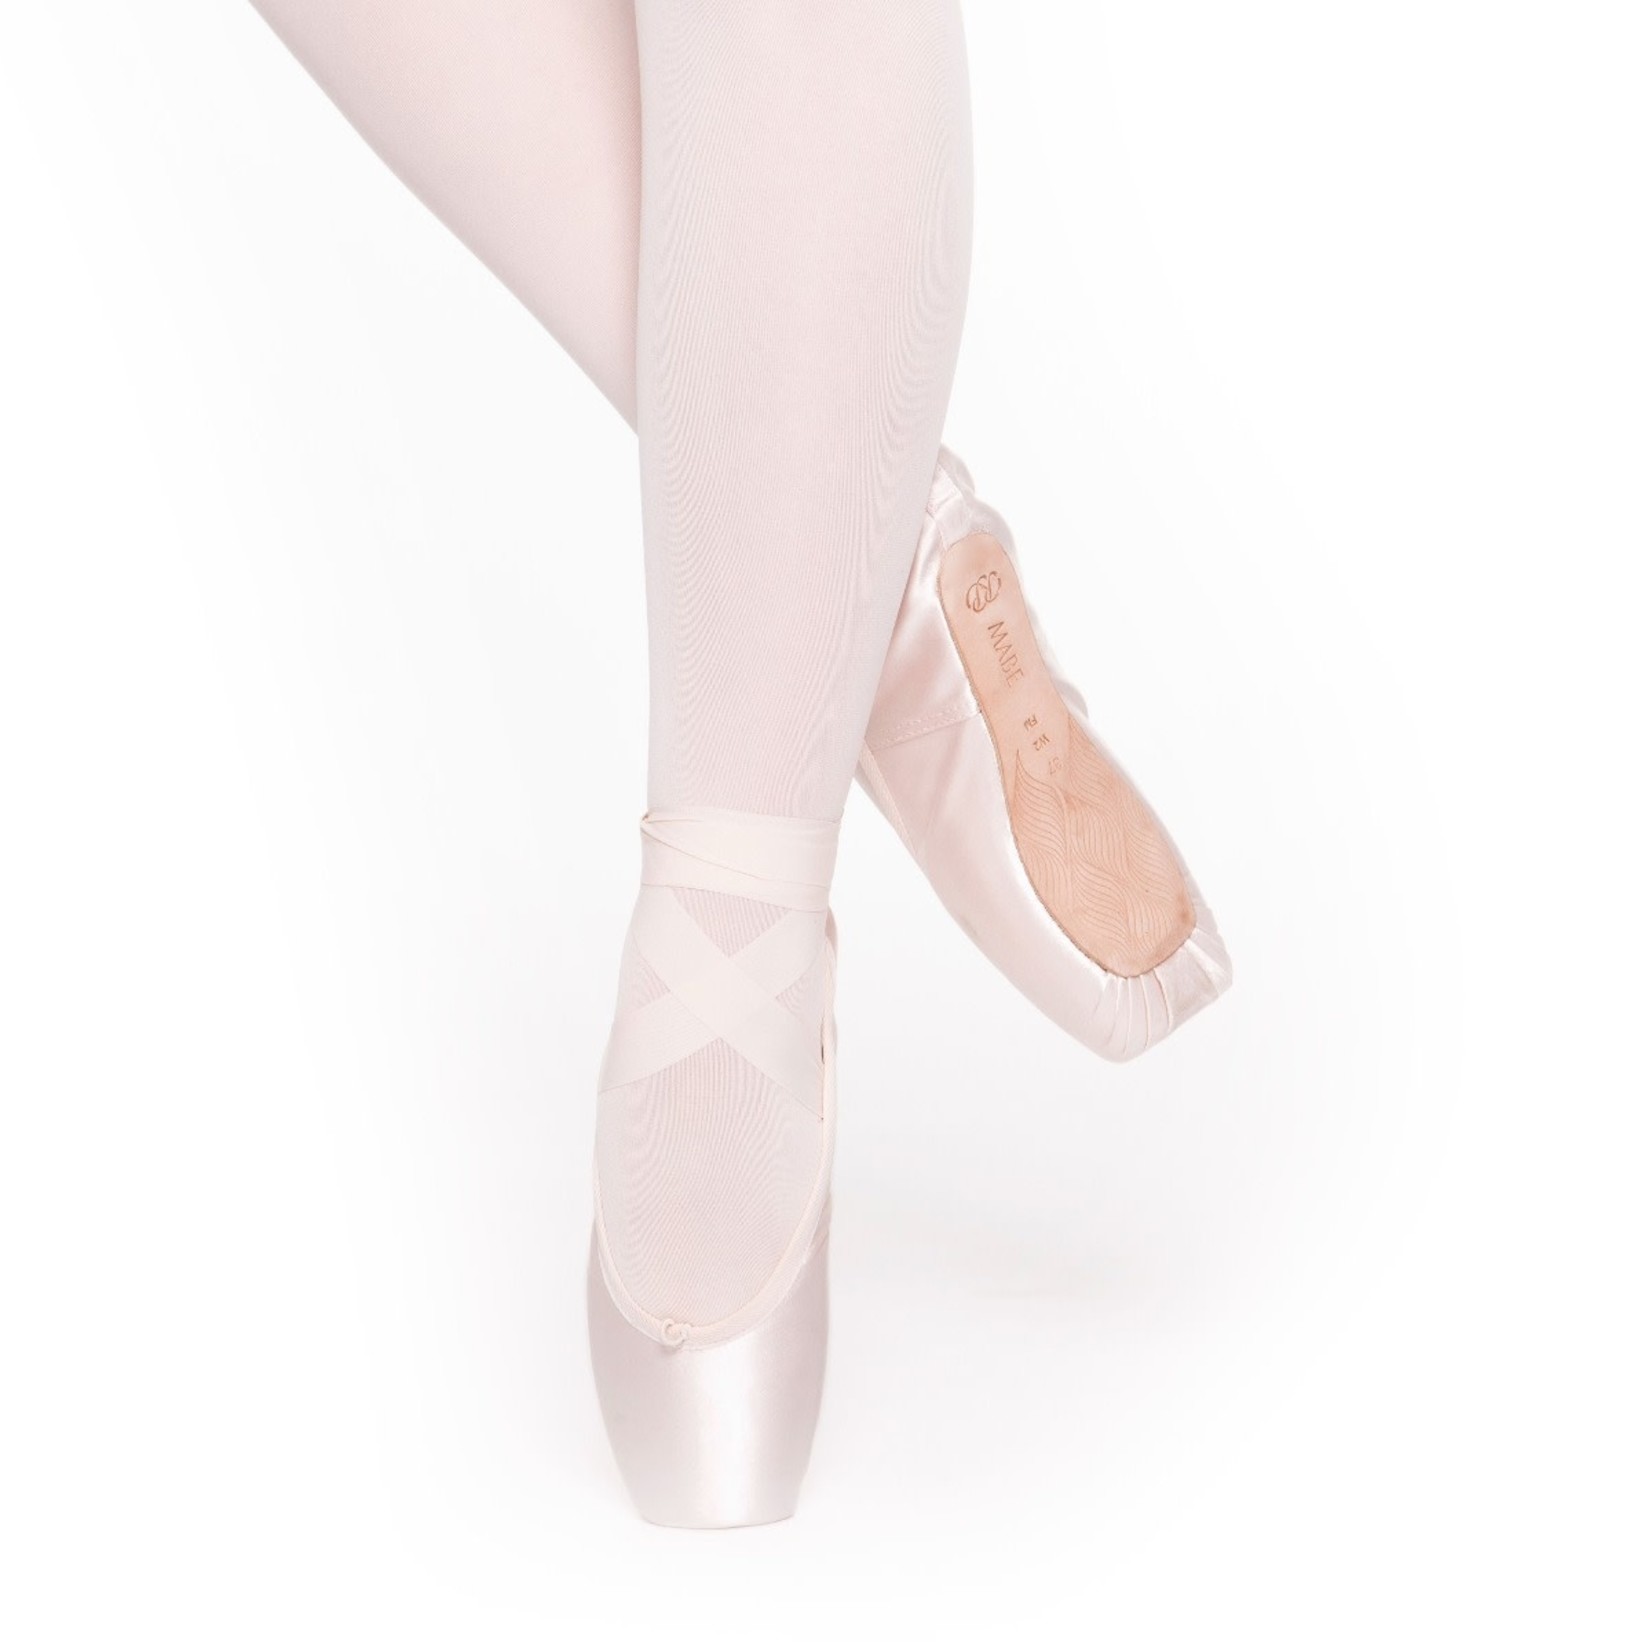 Russian Pointe Russian Pointe Mabe U-Cut with Drawstring Pointe Shoe